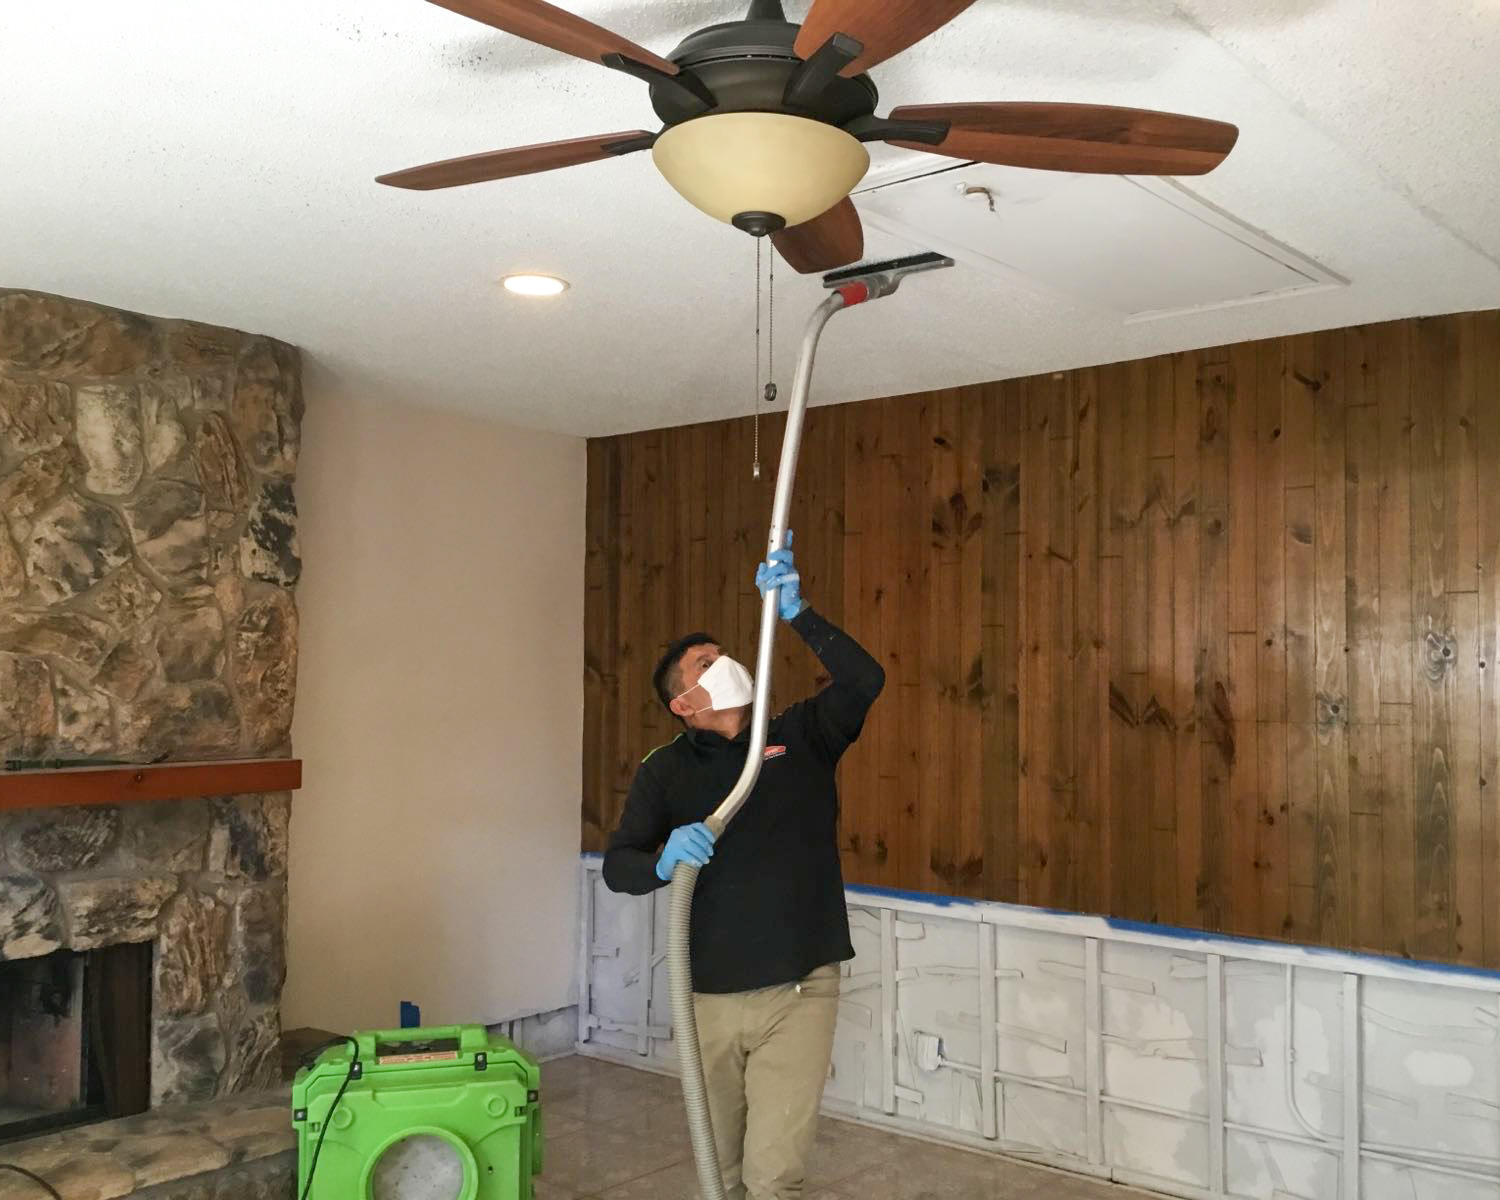 SERVPRO of Delray Beach is able to help with any size mold damage project. We are highly trained and qualified to respond to any size  mold remediation emergency or cleaning services. Call us!